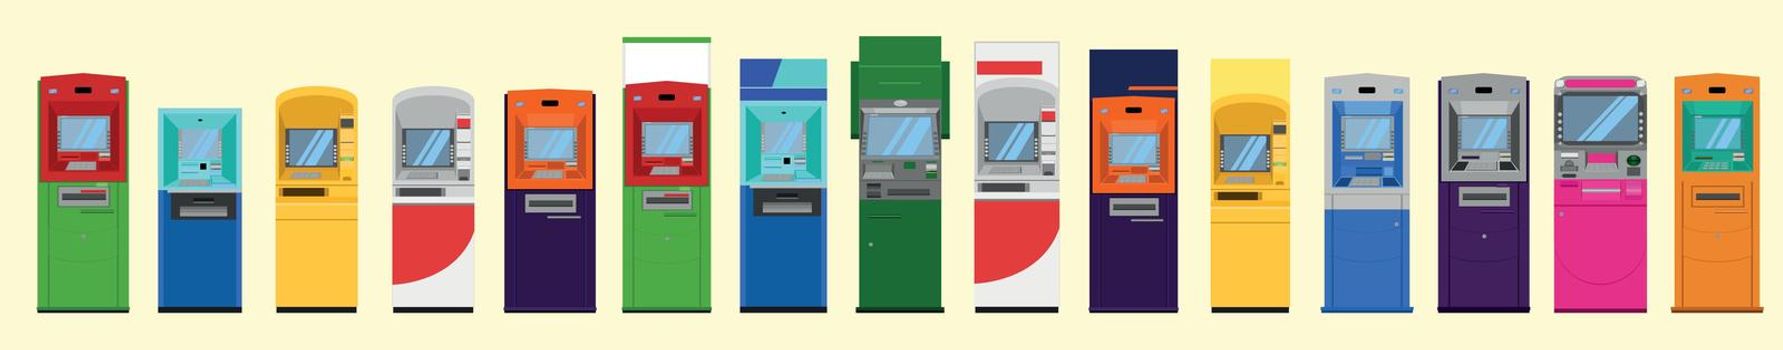 set of atm booth different color, brand. vector illustration eps10